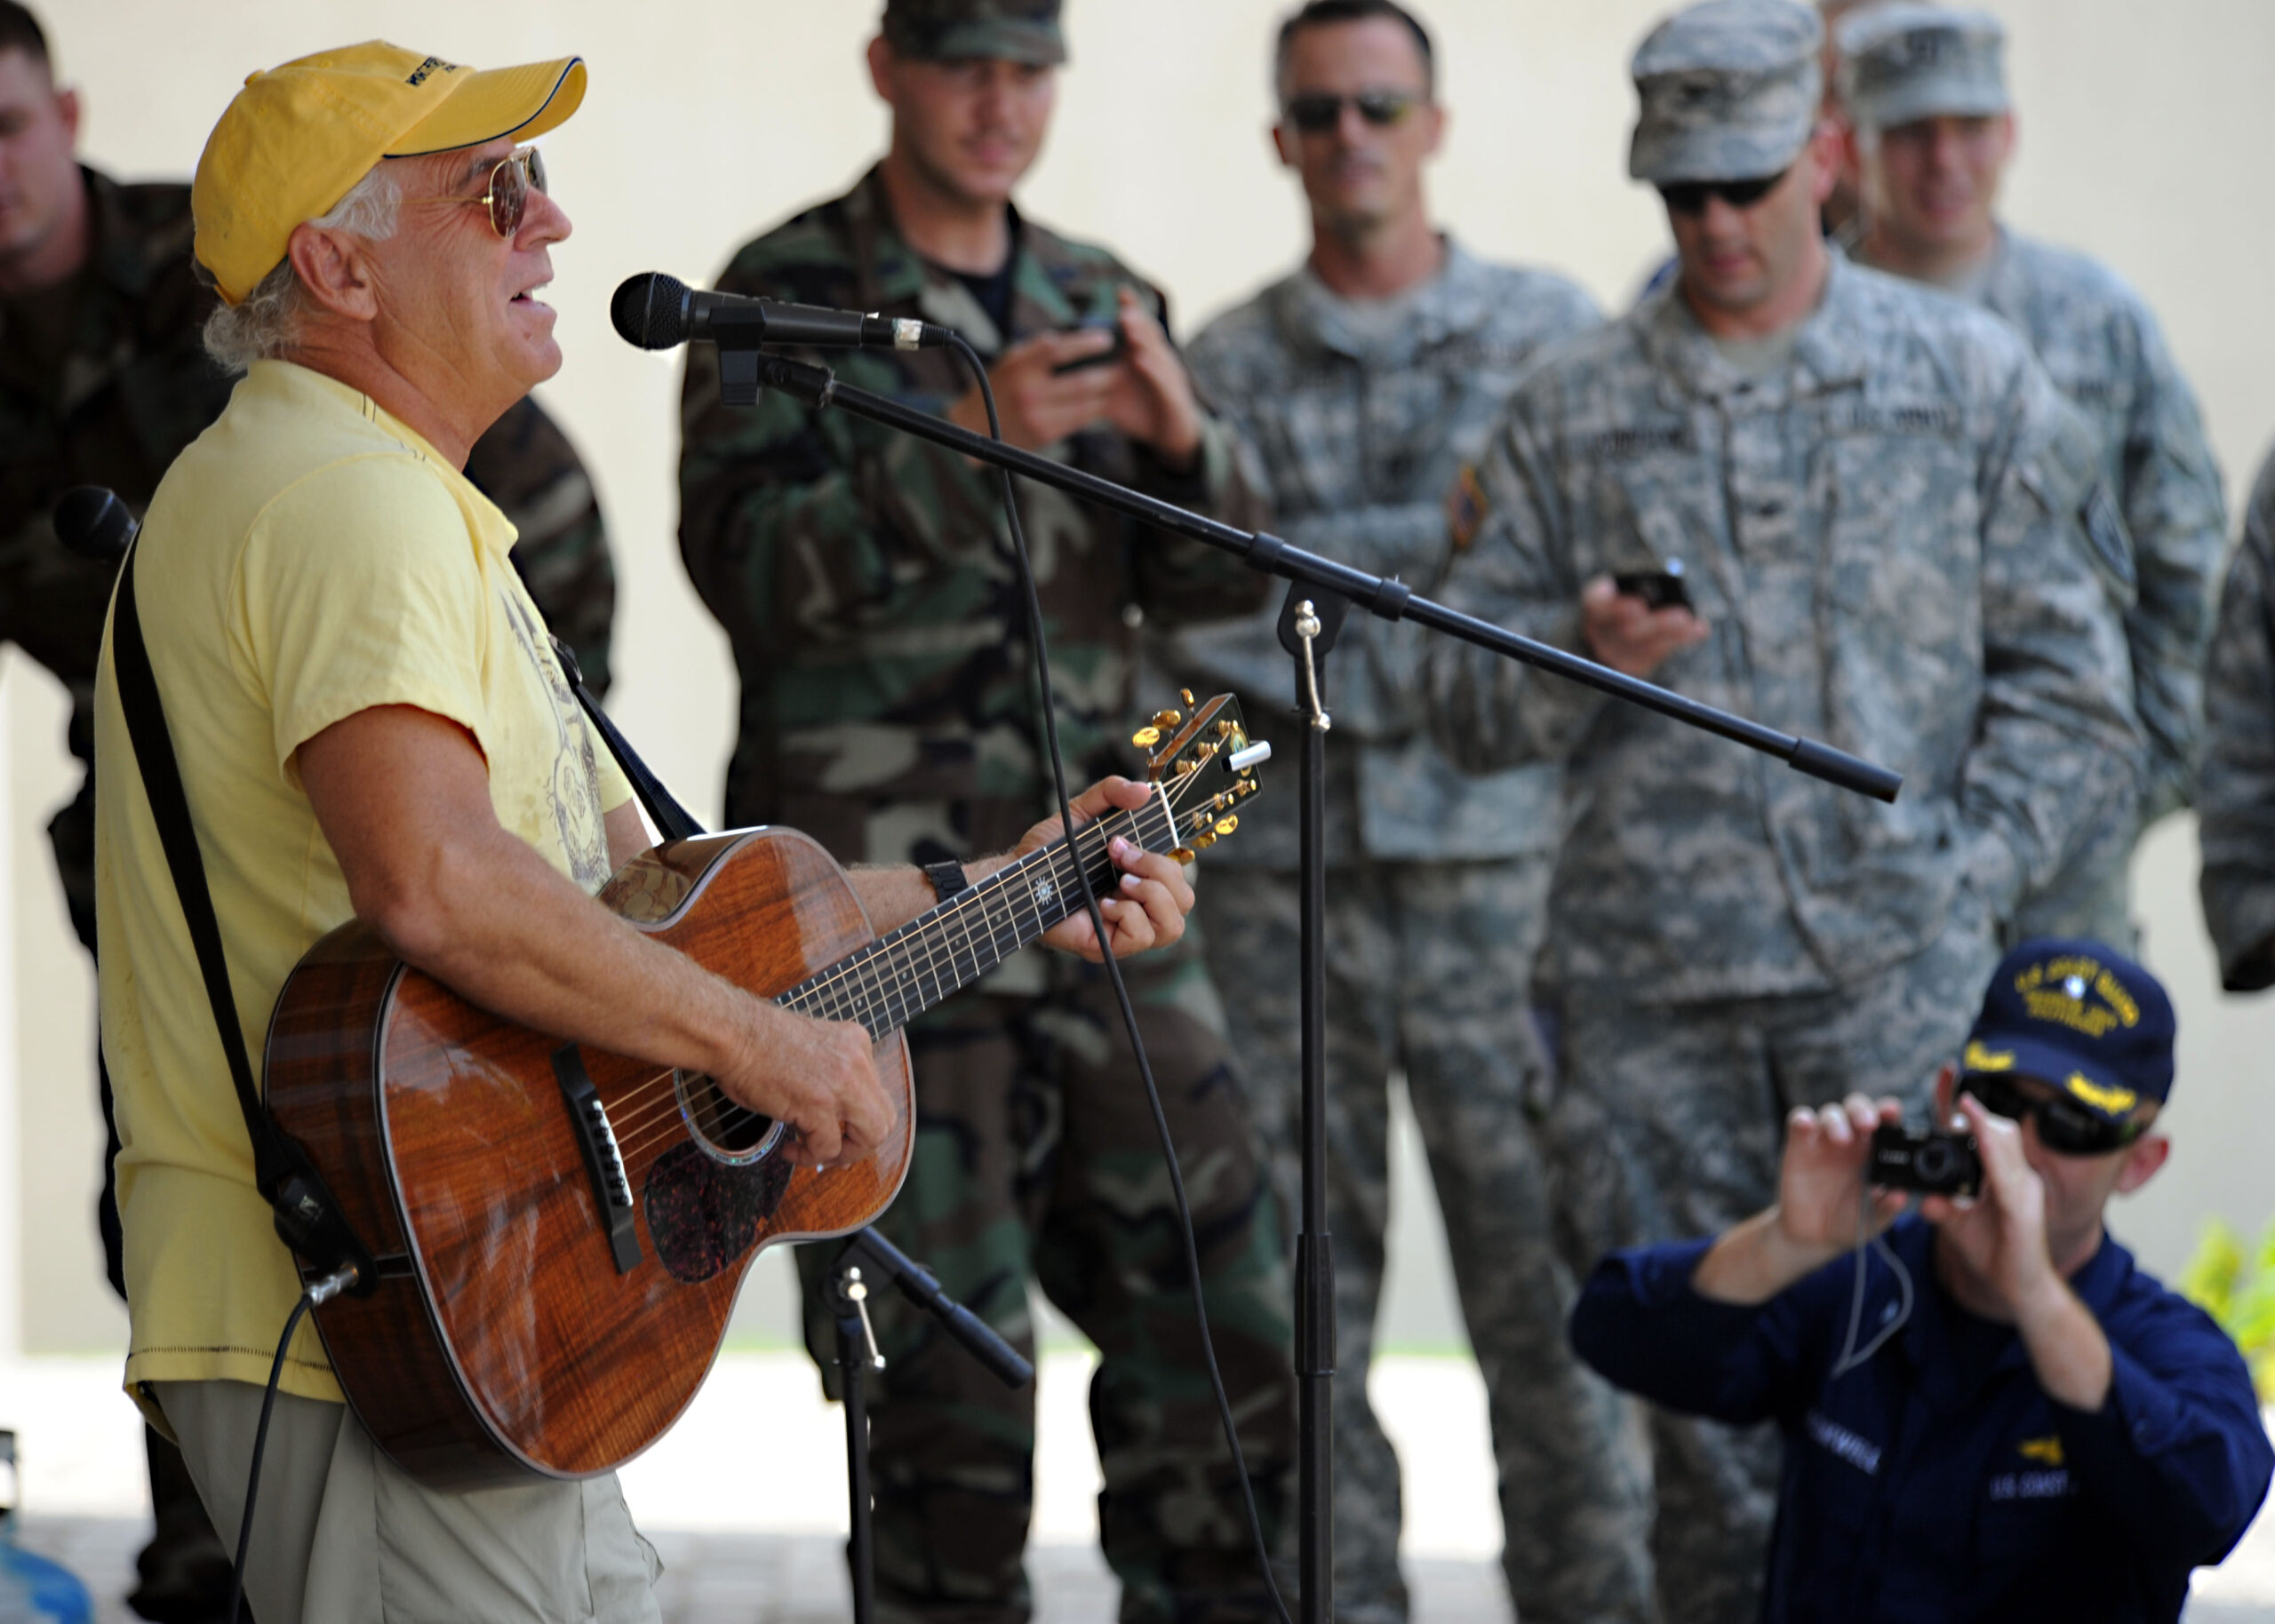 Musician Jimmy Buffet performs for members of Joint Task Force Haiti behind the U.S. Embassy in Port-au-Prince, Haiti, March 3, 2010. (U.S. Navy photo by Senior Chief Mass Communication Specialist Spike Call/Released)